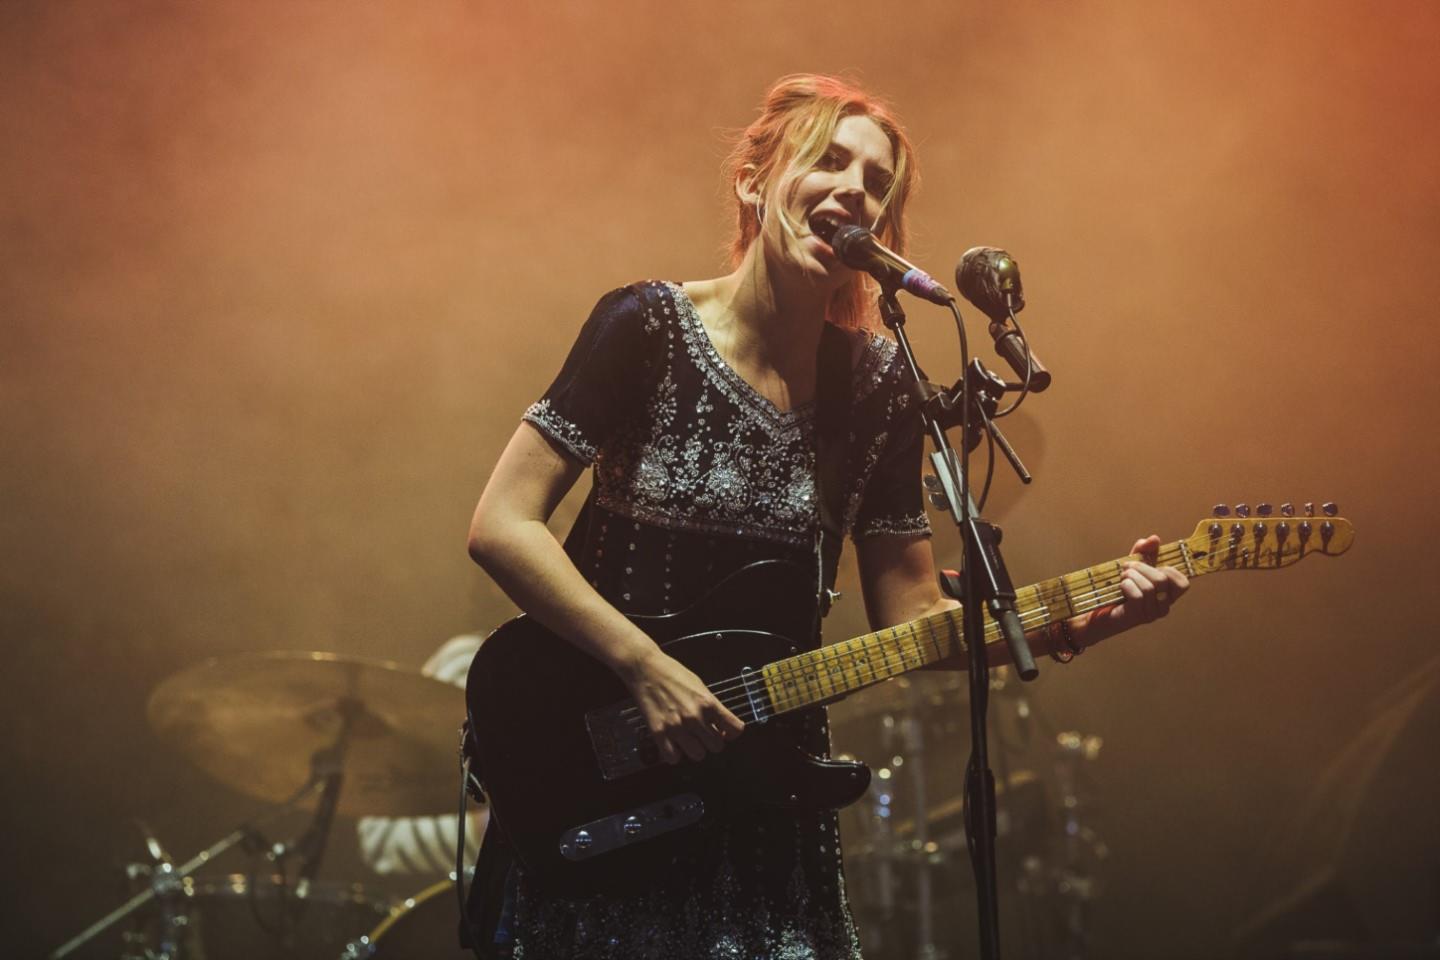 Wolf Alice Tickets | Wolf Alice Tour Dates 2020 and Concert Tickets - viagogo1440 x 960